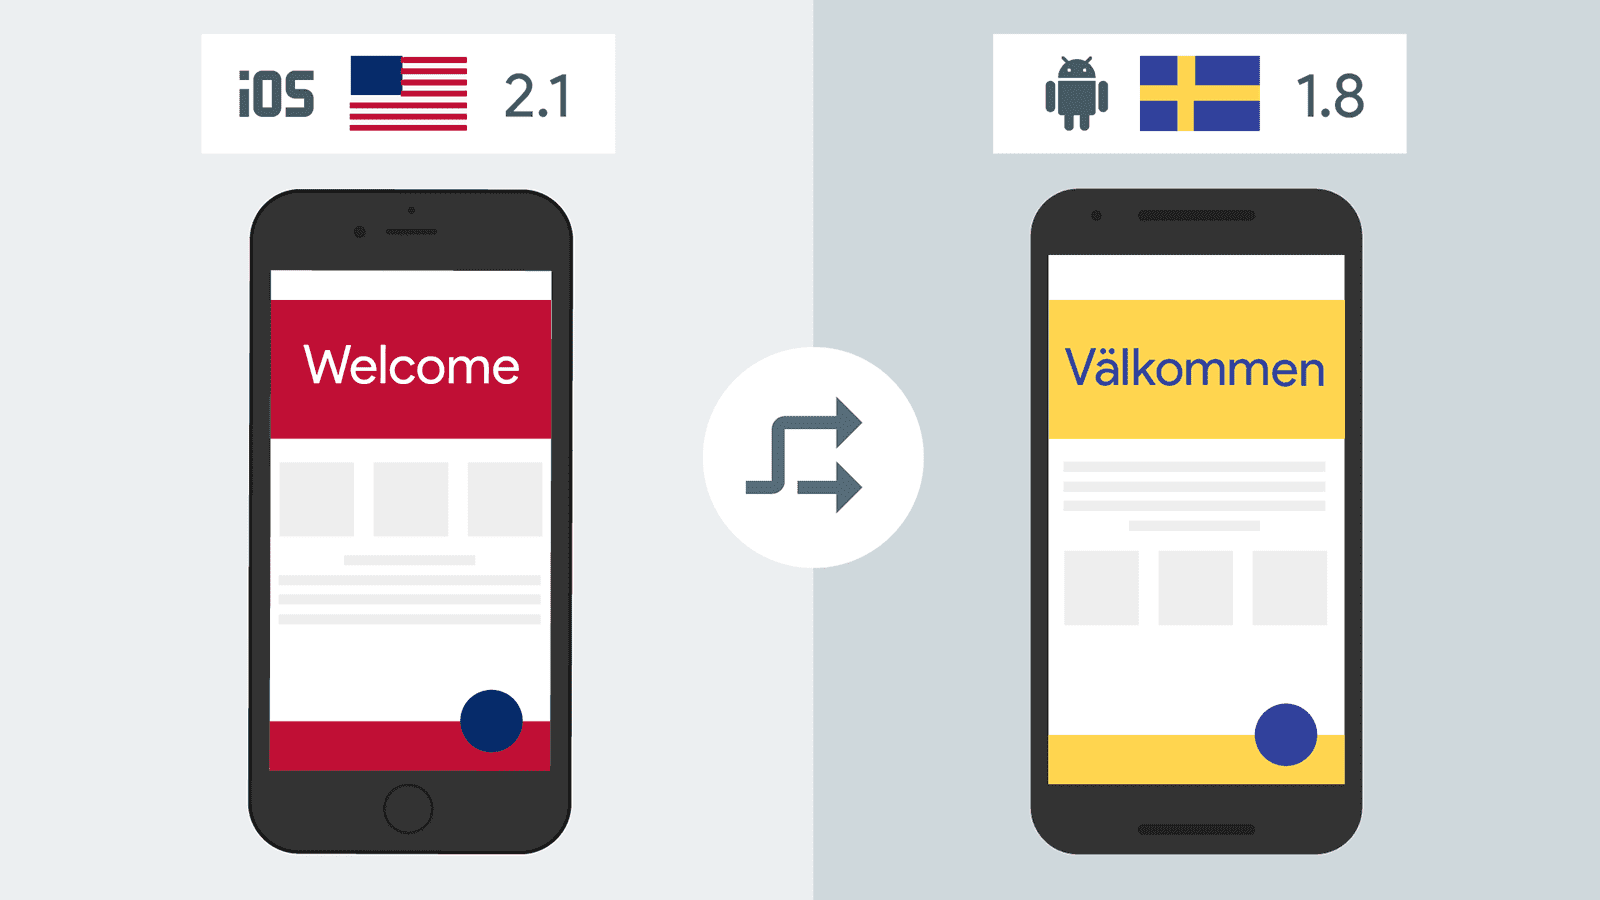 Two phones in two different languages